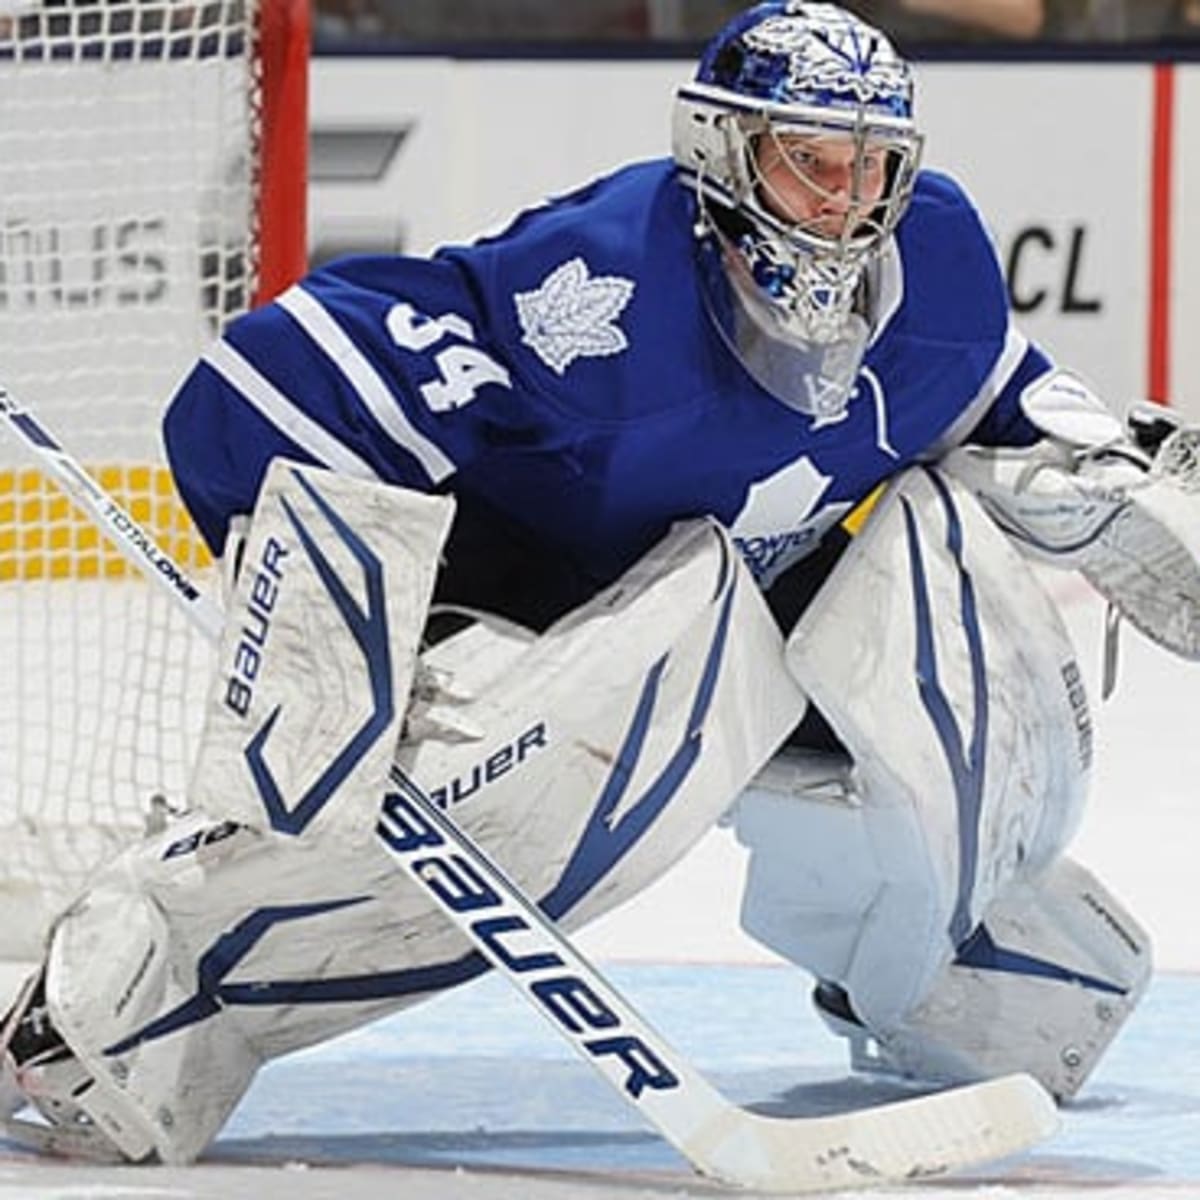 James Reimer, after Pride jersey flap, could play vs. Edmonton Oilers